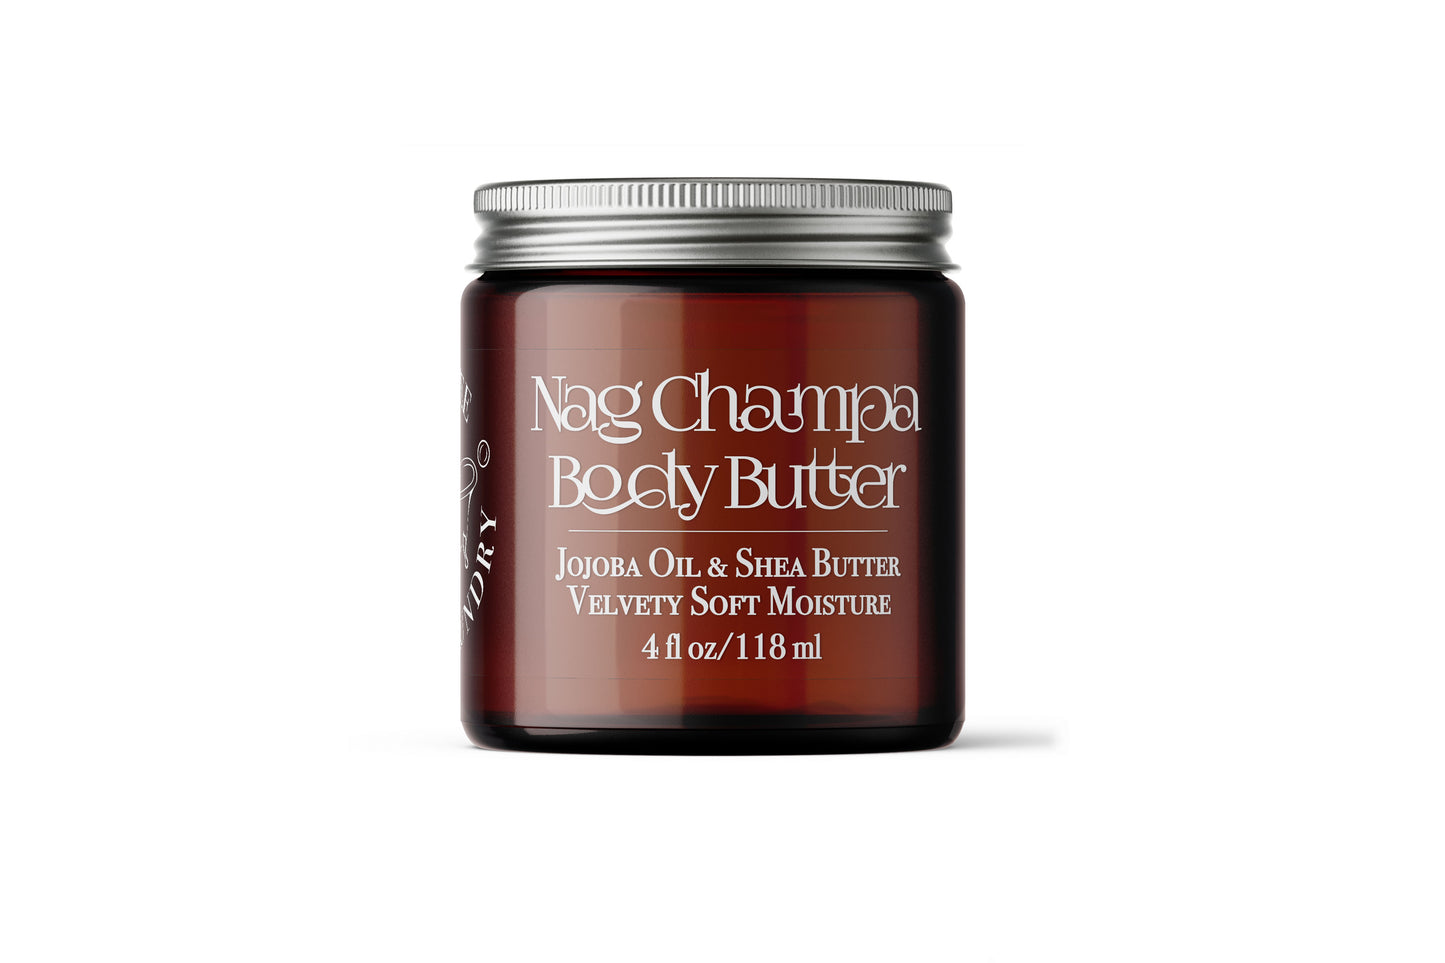 Body Butter - Made to Order